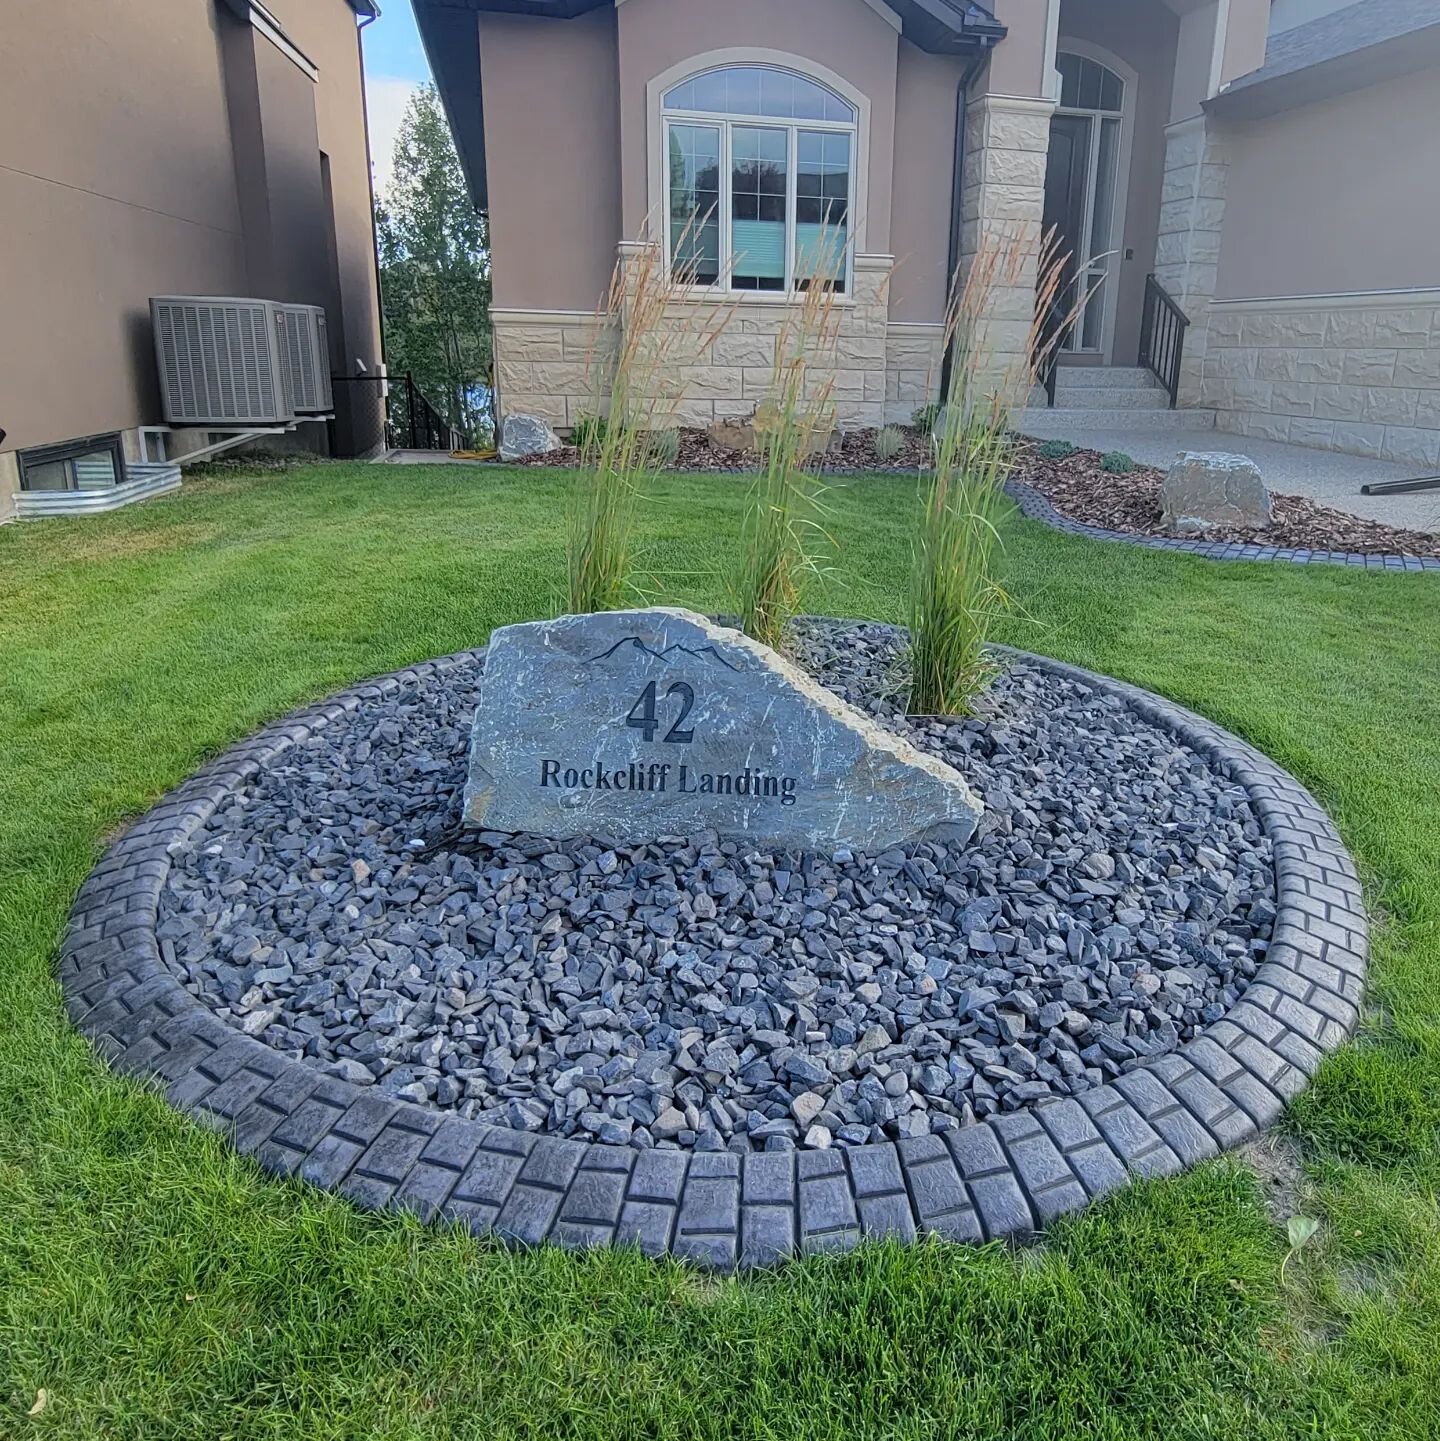 Looking to make your front yard a little more classy?

Ask us about our address rocks!

#yournaturalstonespecialists #landscaping #construction #yyc #calgary #addressrock #kootneybrownstone